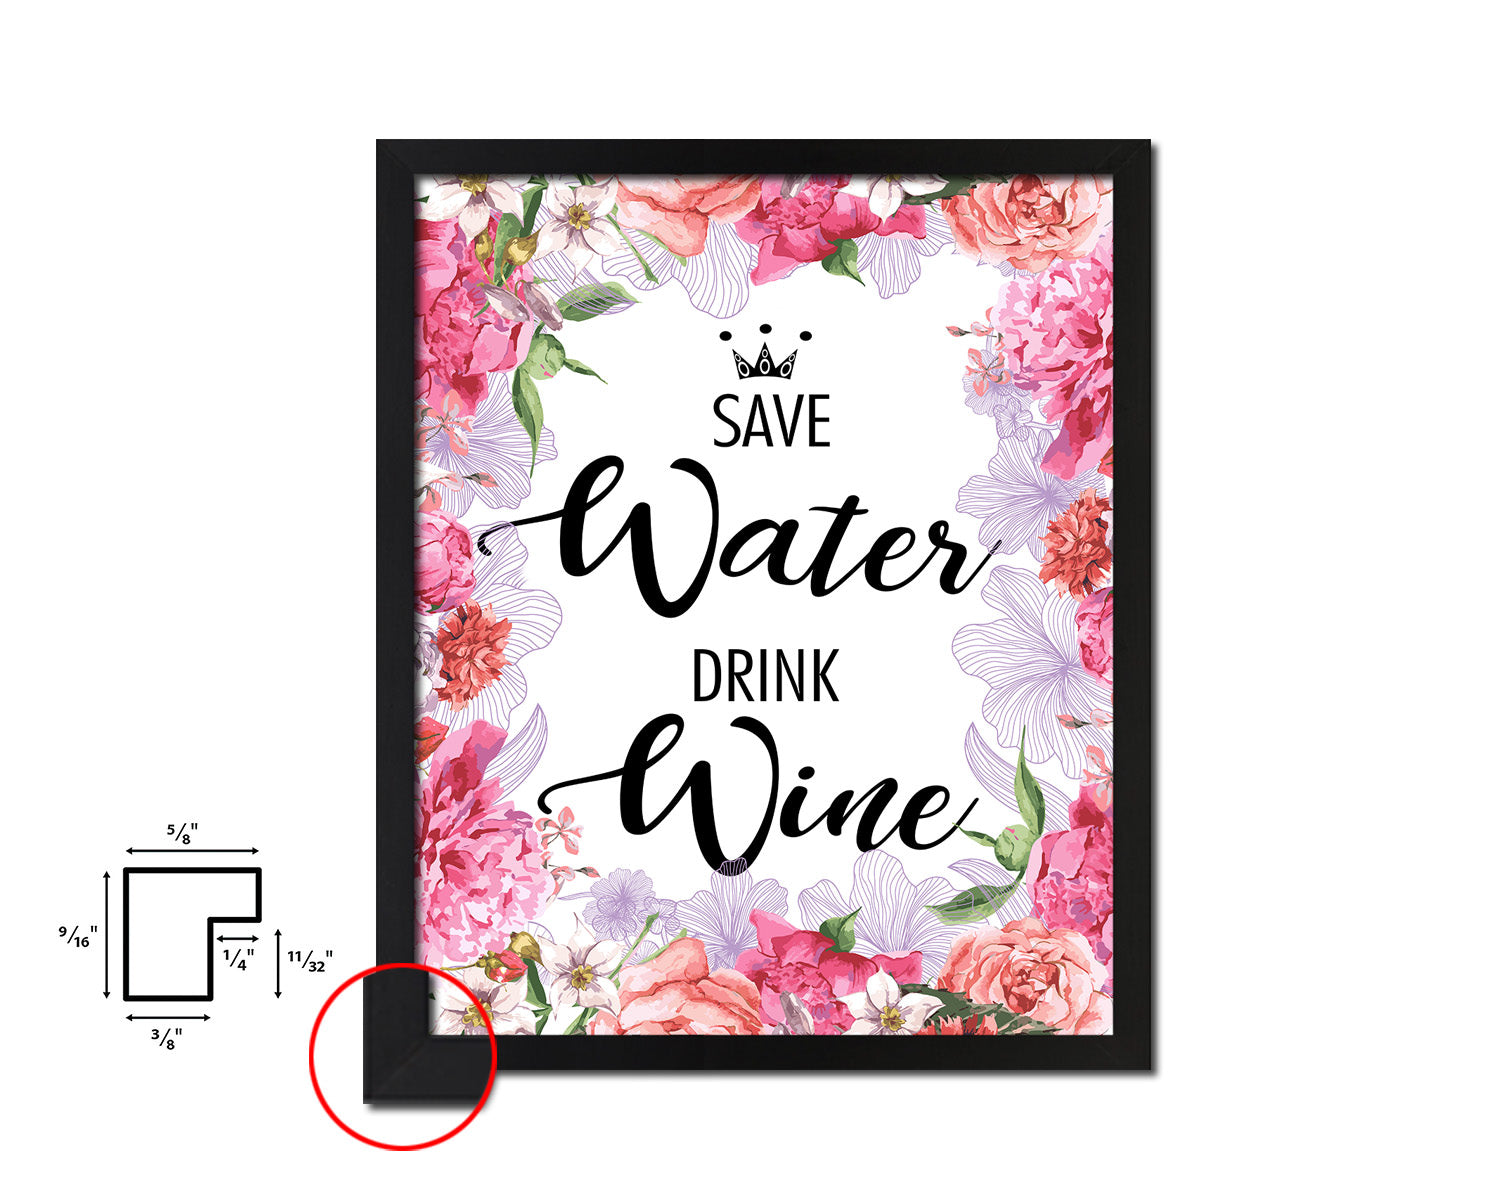 Save water drink wine Words Wood Framed Print Wall Decor Art Gifts